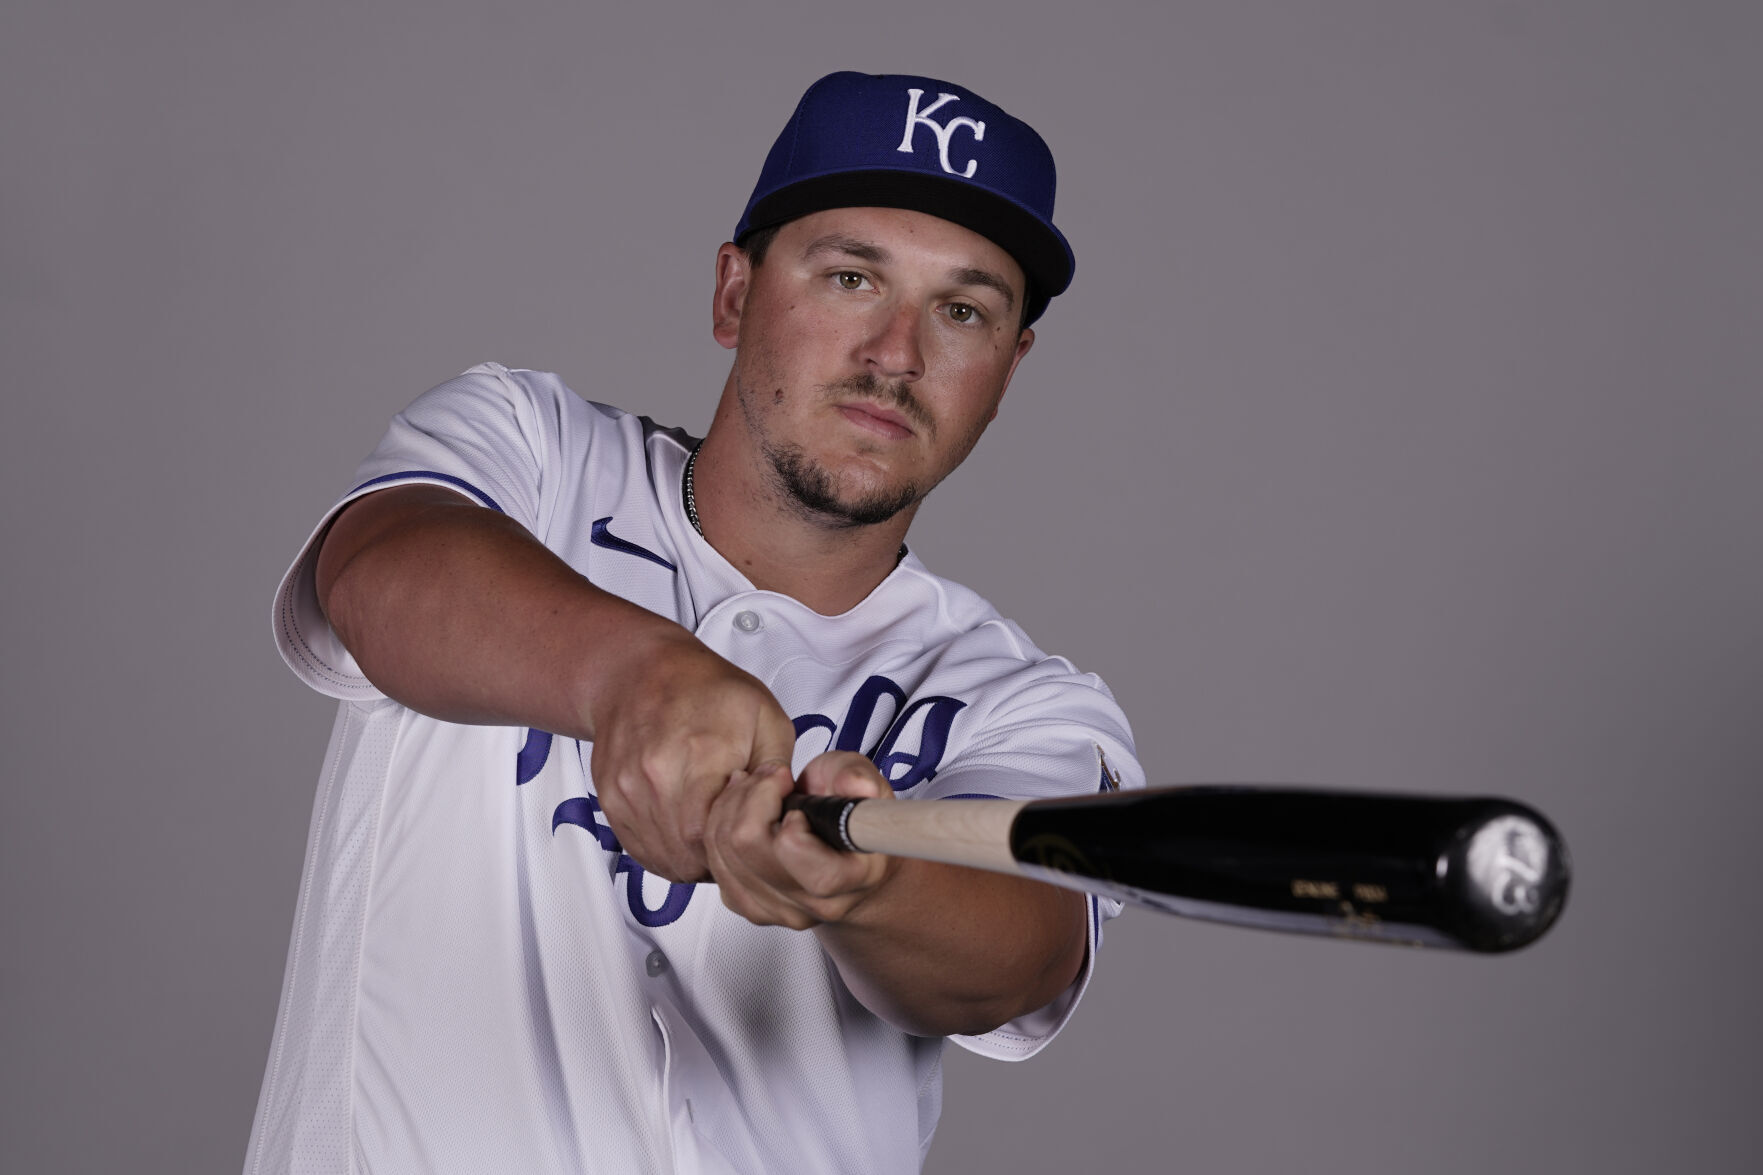 In James Rivers Vinnie Pasquantino, the Kansas City Royals may have found a true winner